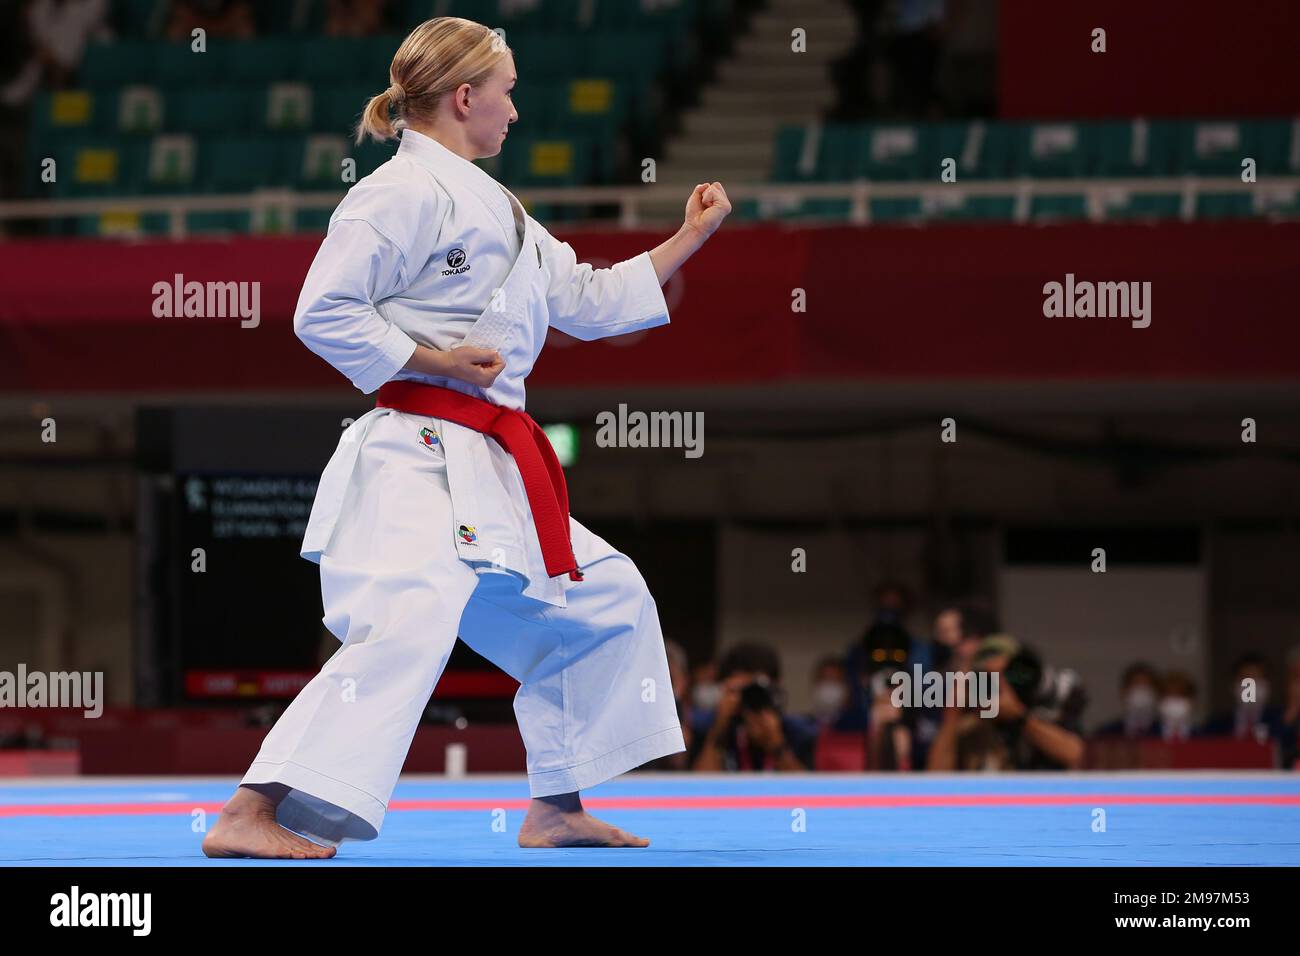 AUG 5, 2021 - TOKYO, JAPAN: Jasmine Jüttner of Germany makes History by becoming the very first Karateka at the Olympics by competing in the Women's Kata Elimination Round at the Tokyo 2020 Olympic Games (Photo by Mickael Chavet/RX) Stock Photo